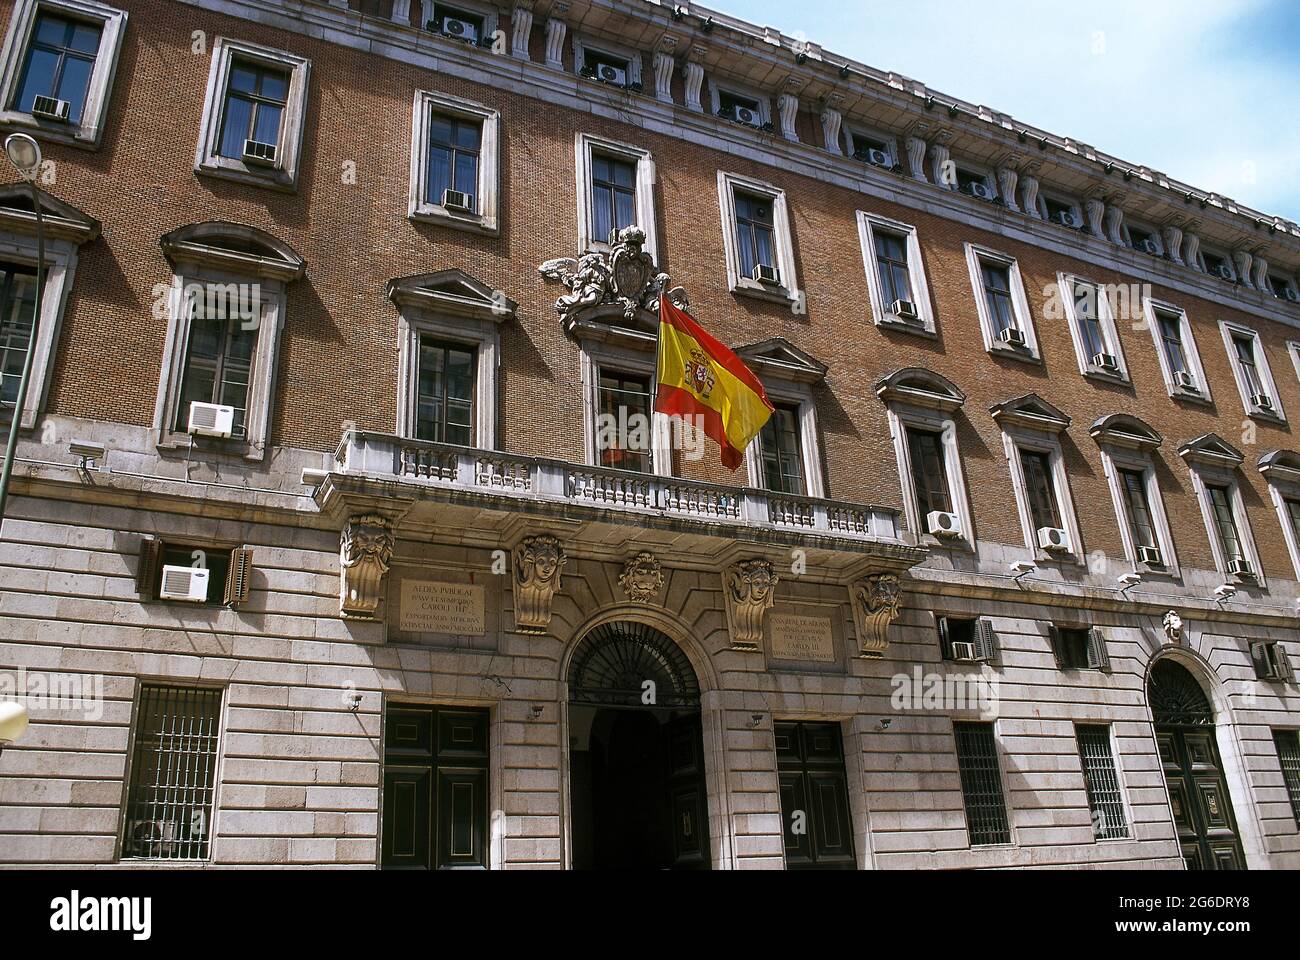 Spain, Madrid. Ministry of Finance (Real Casa de la Aduana). Partial view of the main facade of the building, the former Real Casa de la Aduana, built by Francisco Sabatini between 1761 and 1769 by order of King Charles III. Stock Photo